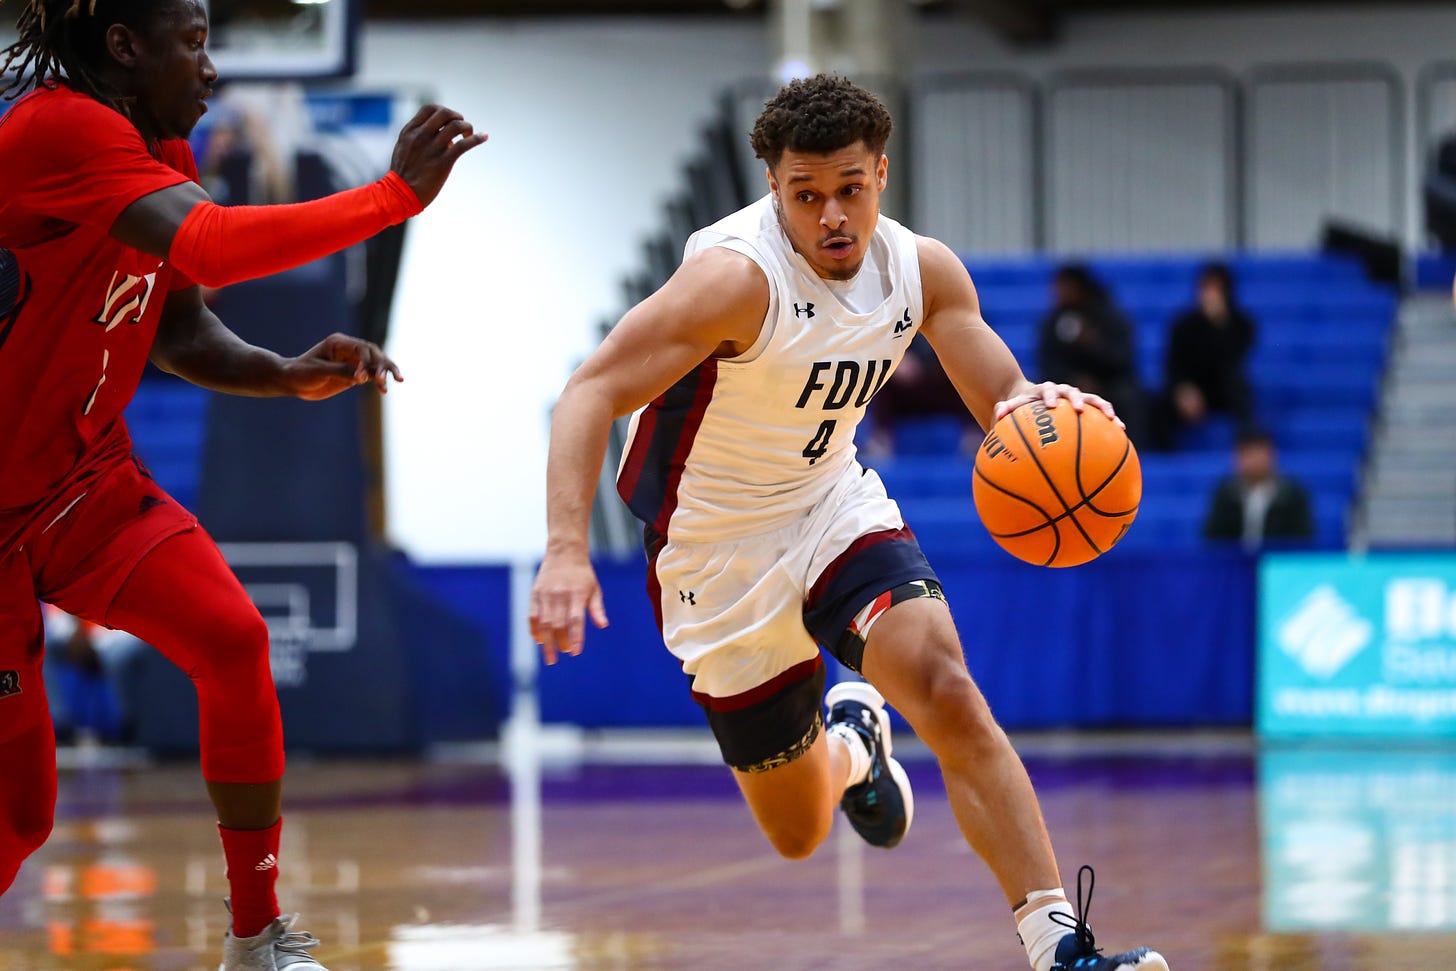 Guard Grant Singleton is one of three players who followed coach Tobin Anderson from Division II St. Thomas Aquinas to Fairleigh Dickinson. (Photo by Larry Levanti / courtesy of Fairleigh Dickinson athletics)